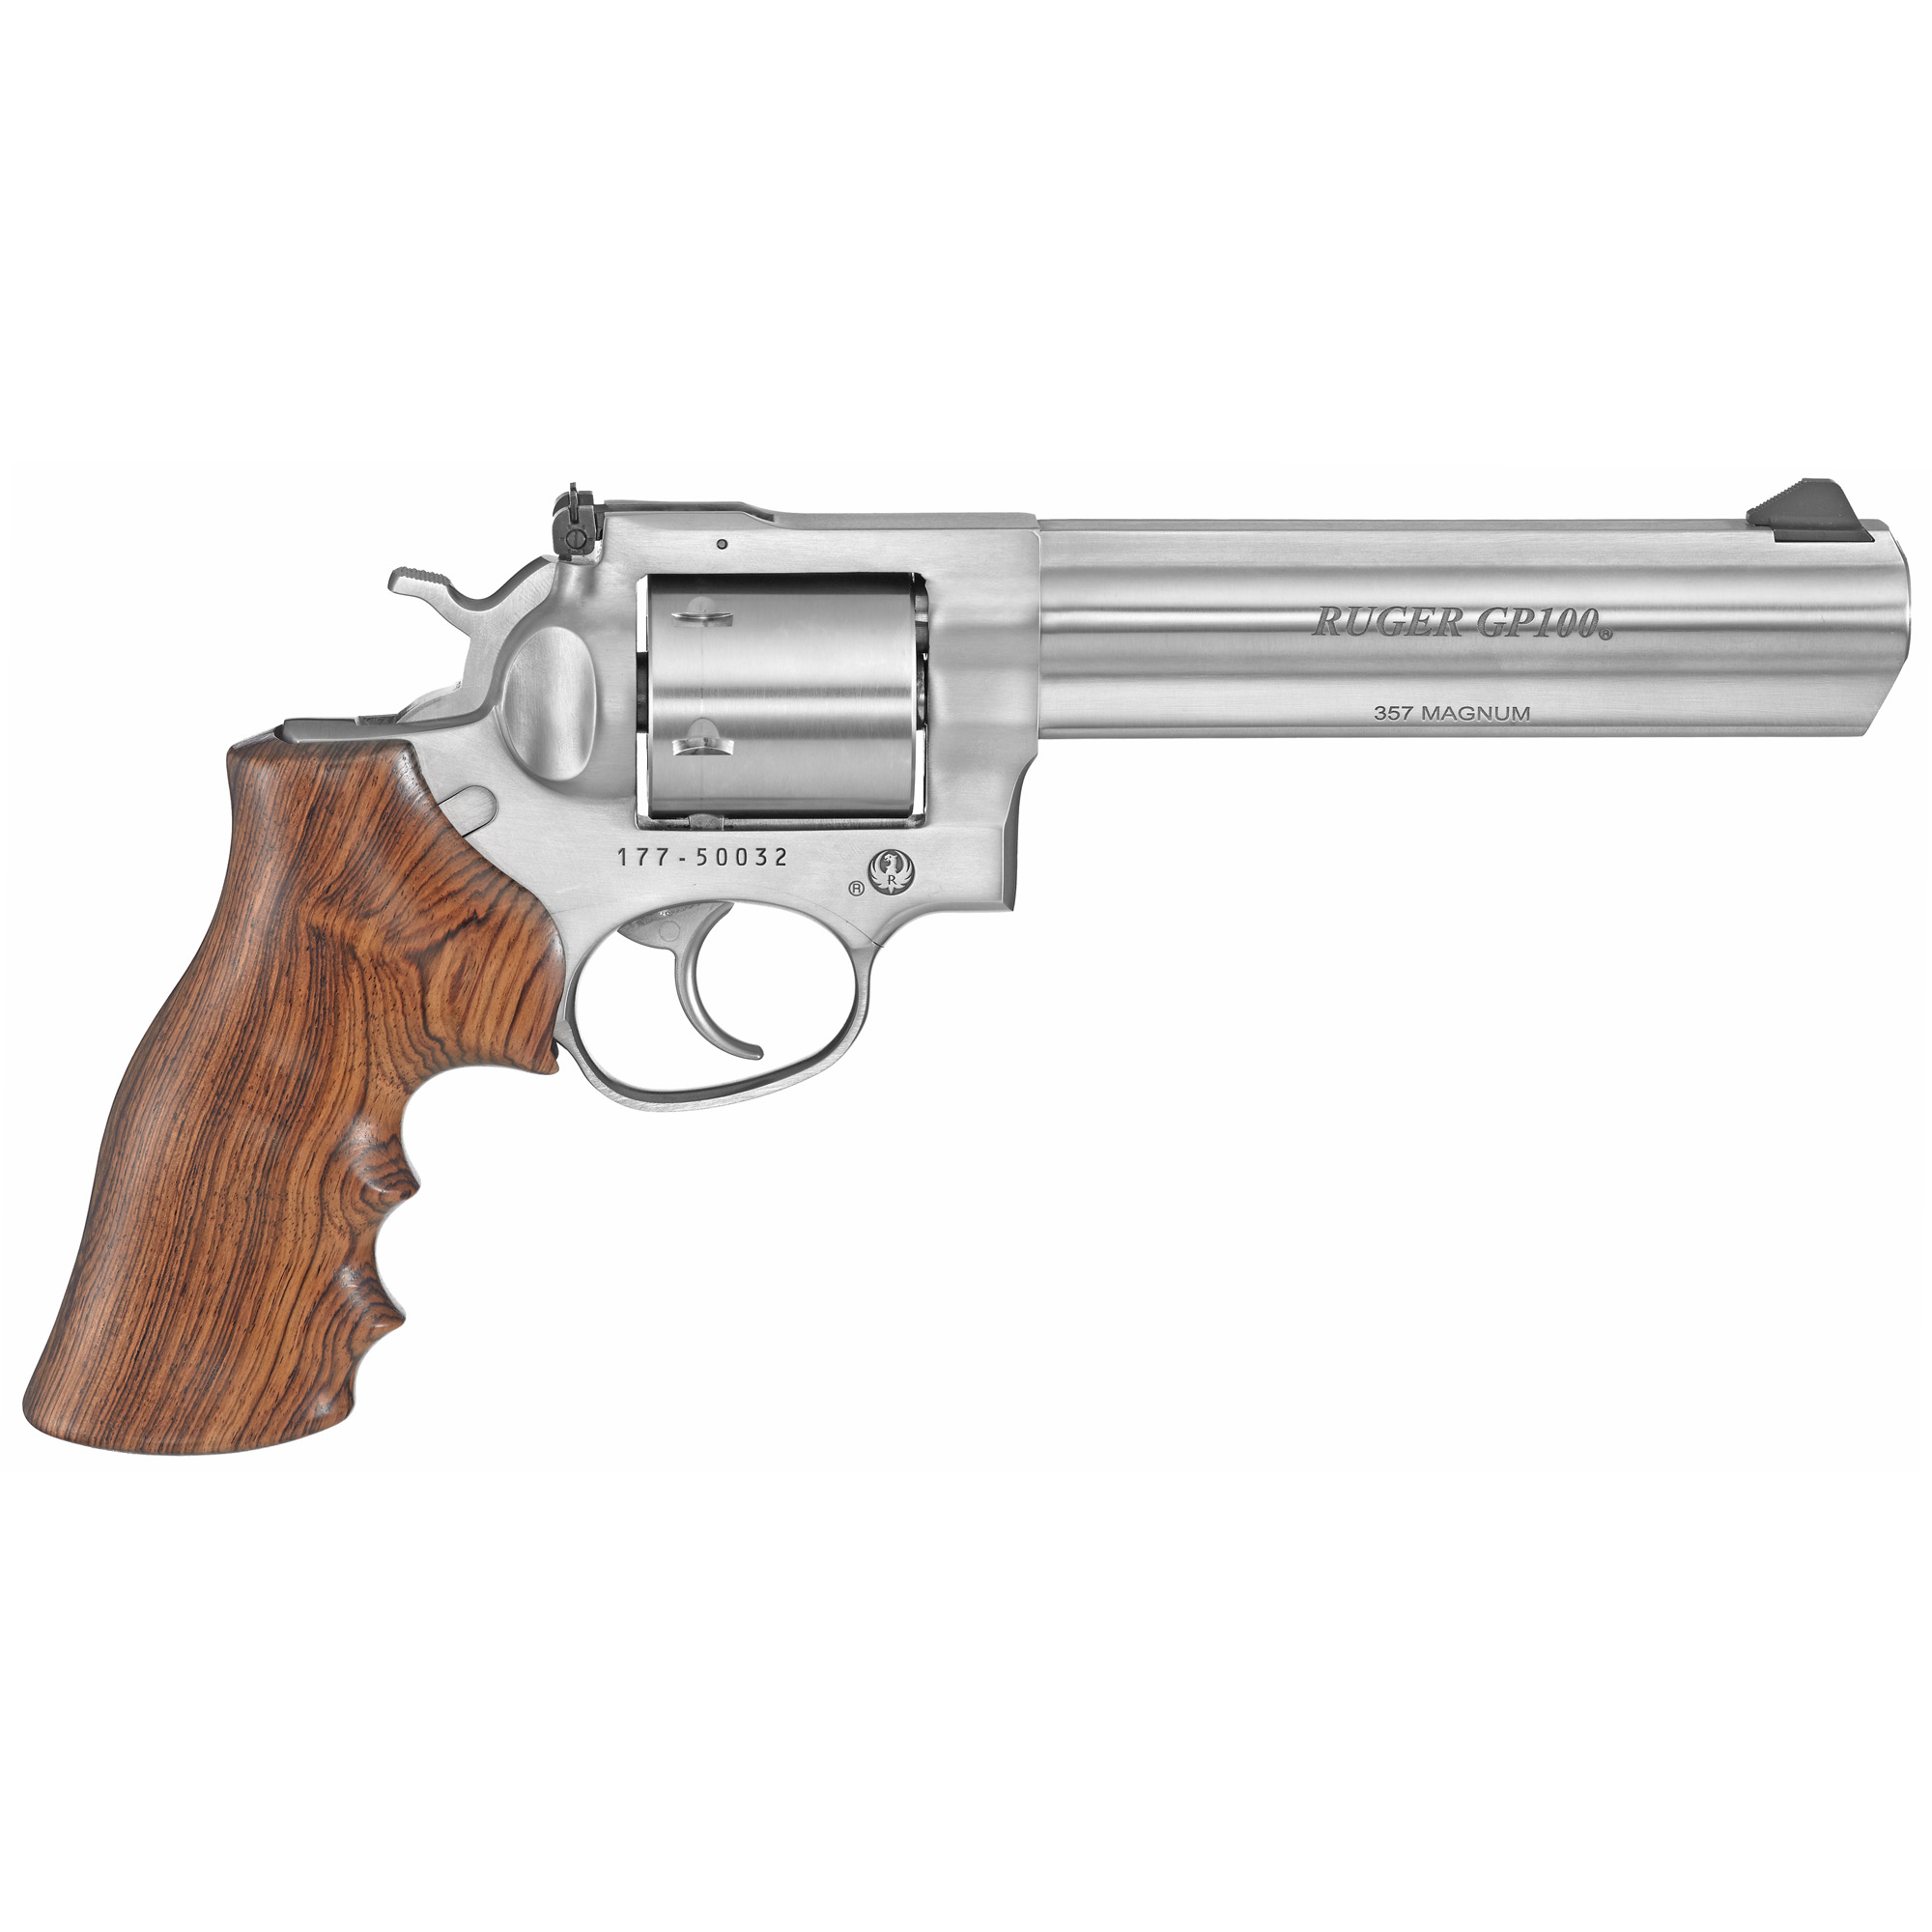 RUGER GP100 357MAG 6 STS 6RD AS